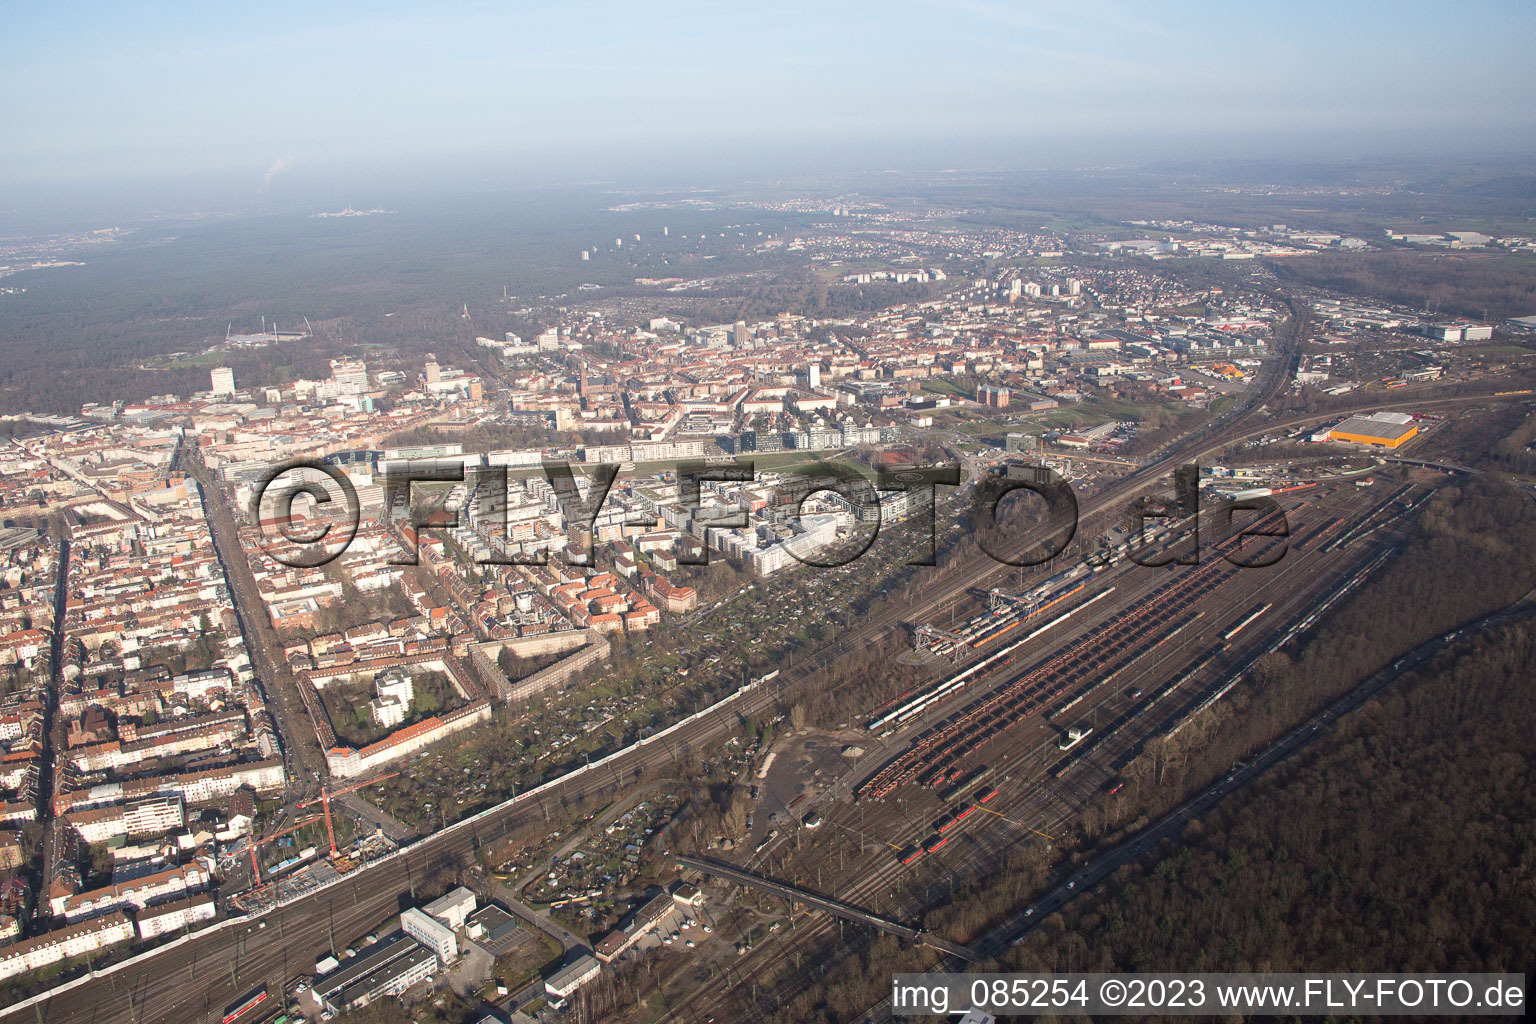 District Oststadt in Karlsruhe in the state Baden-Wuerttemberg, Germany seen from above